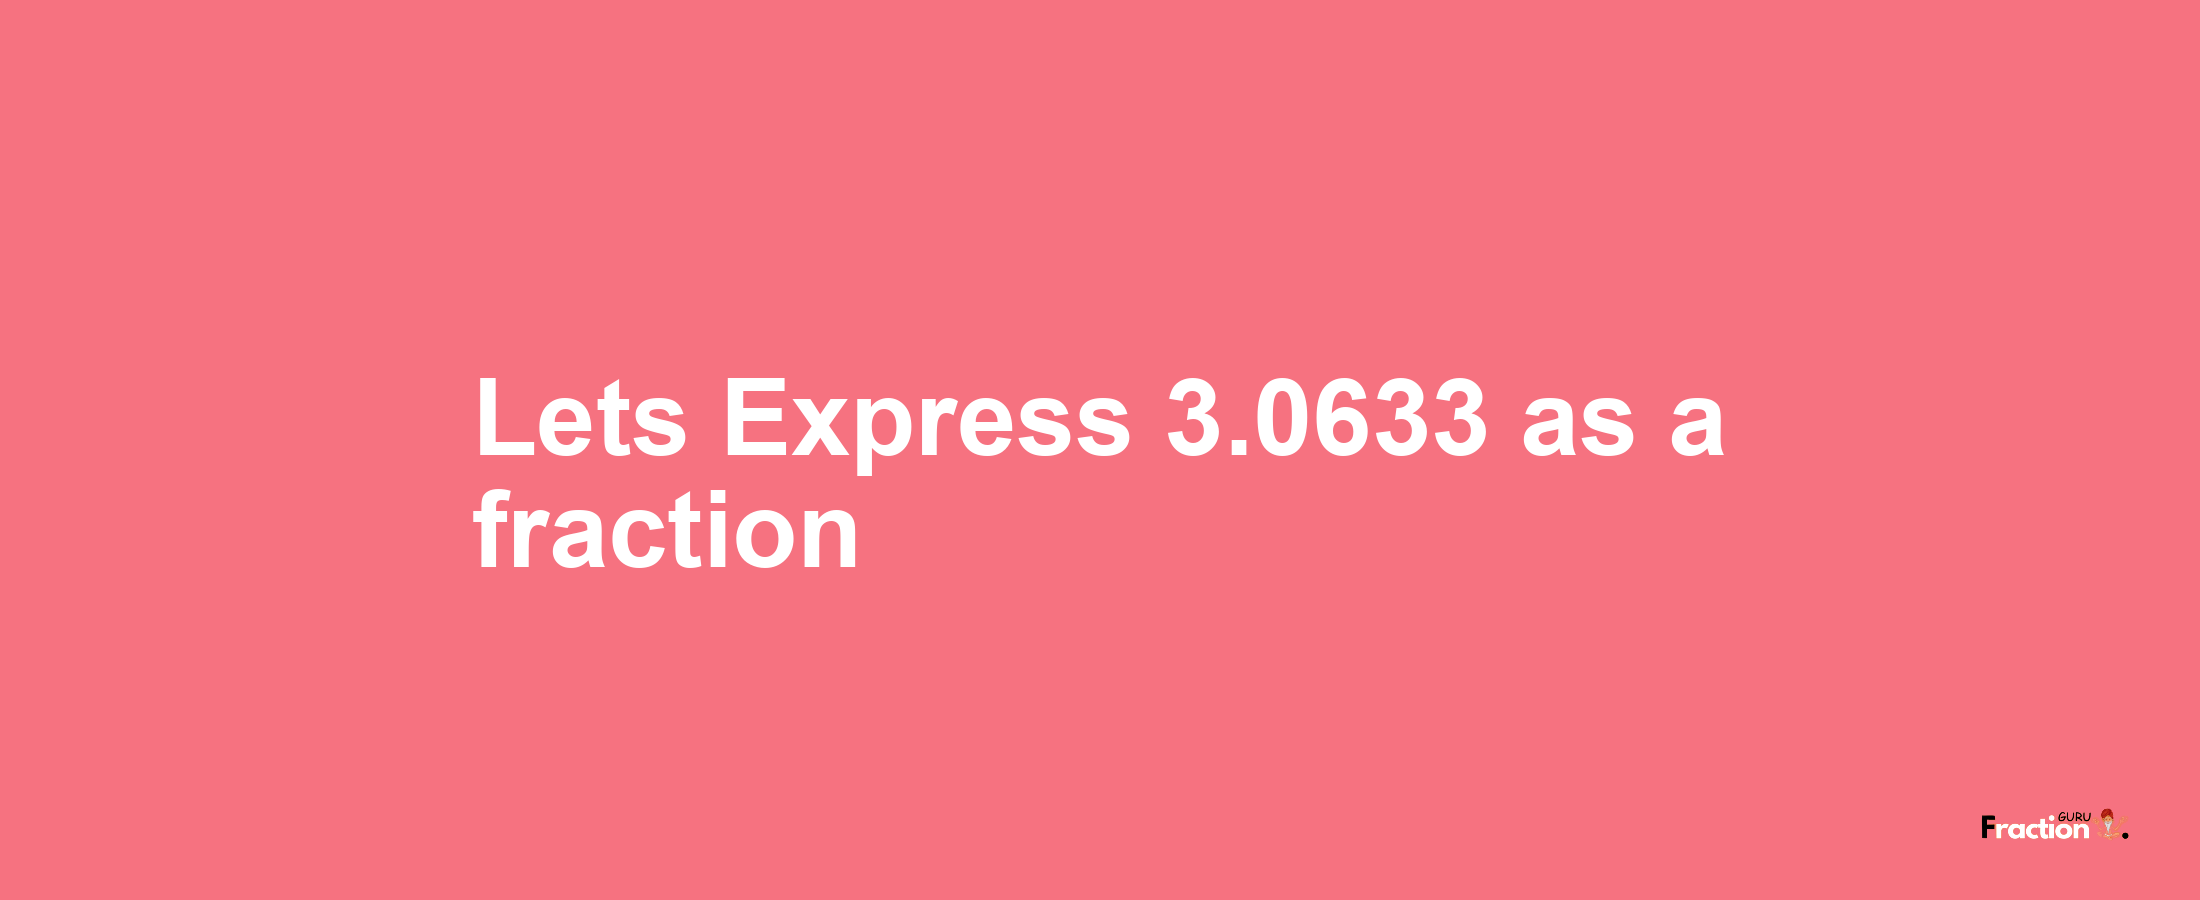 Lets Express 3.0633 as afraction